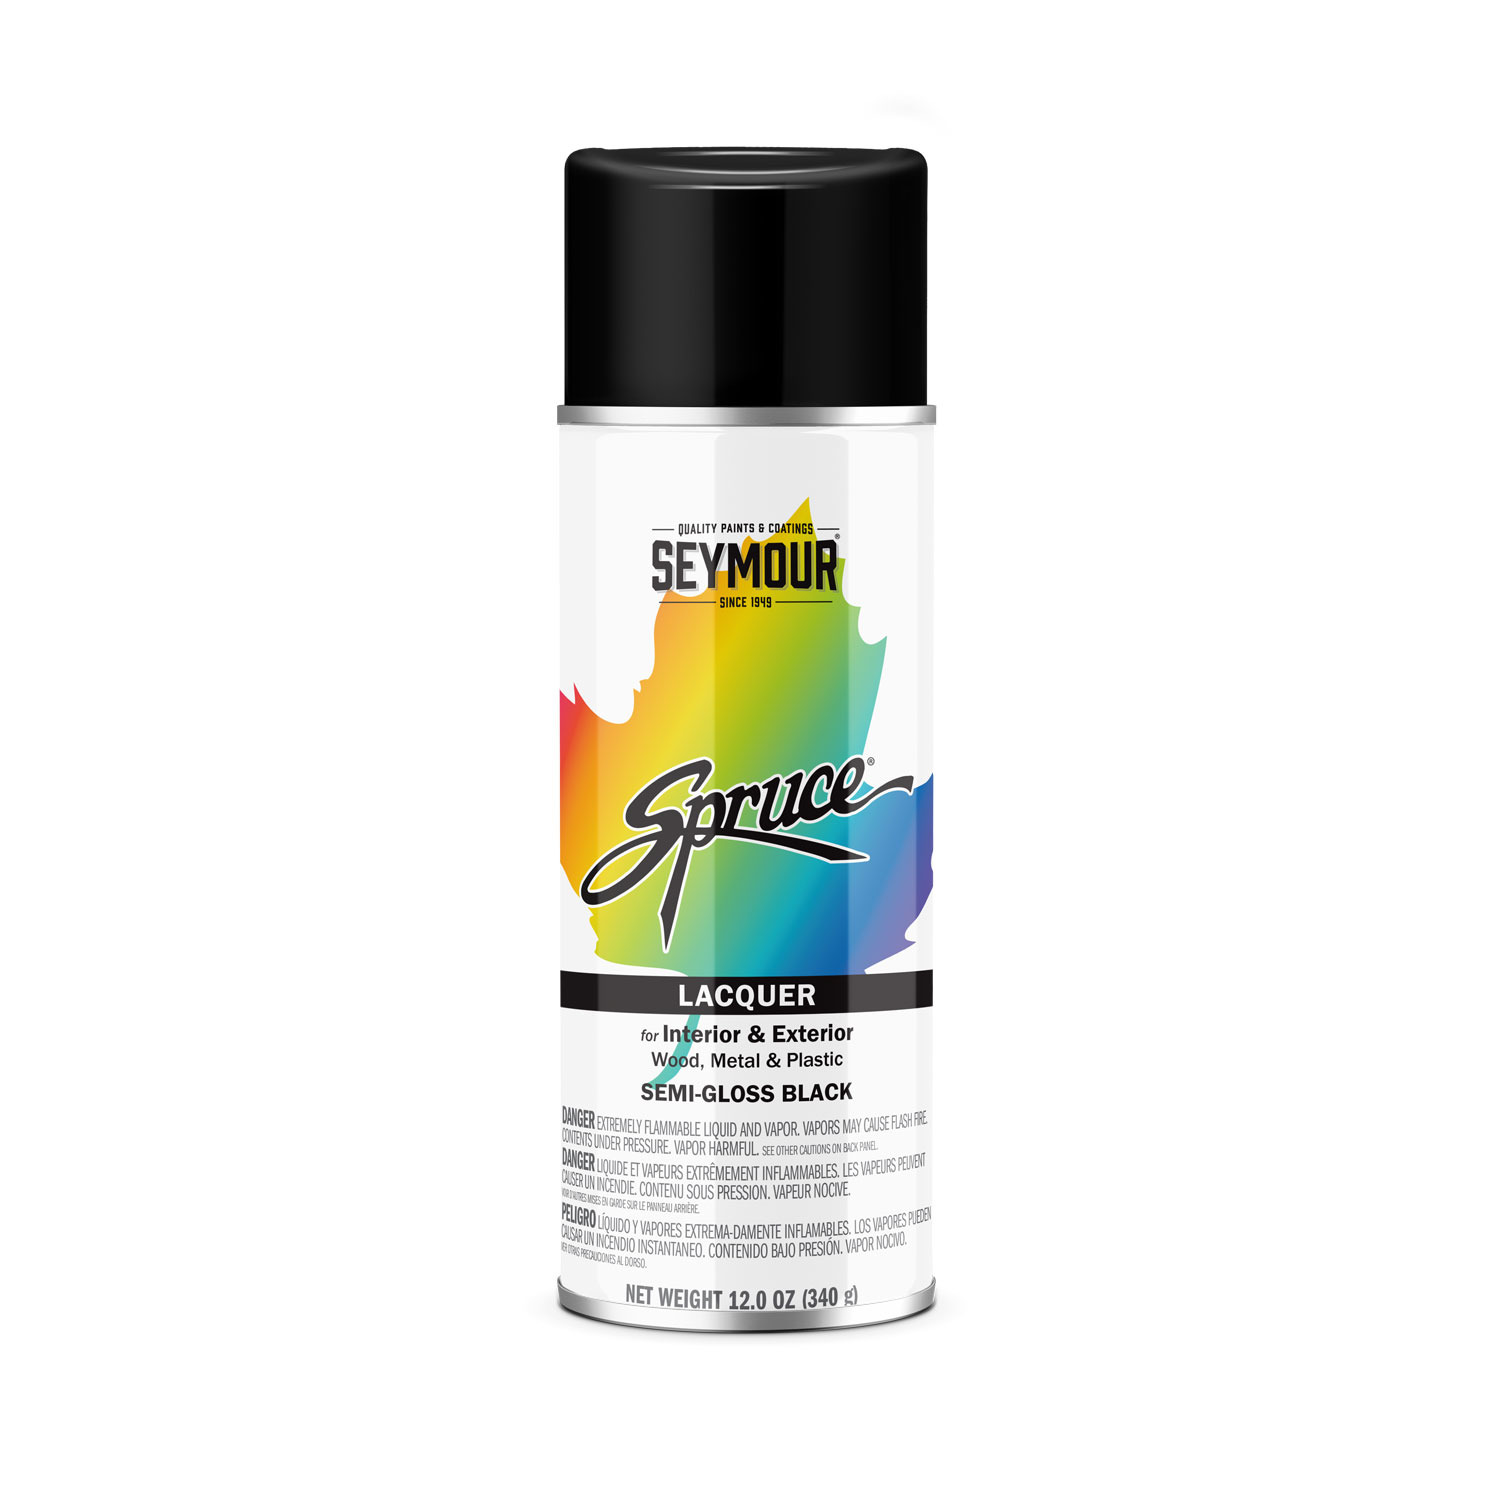 98-38 Seymour Spruce Lacquer Spray Paint